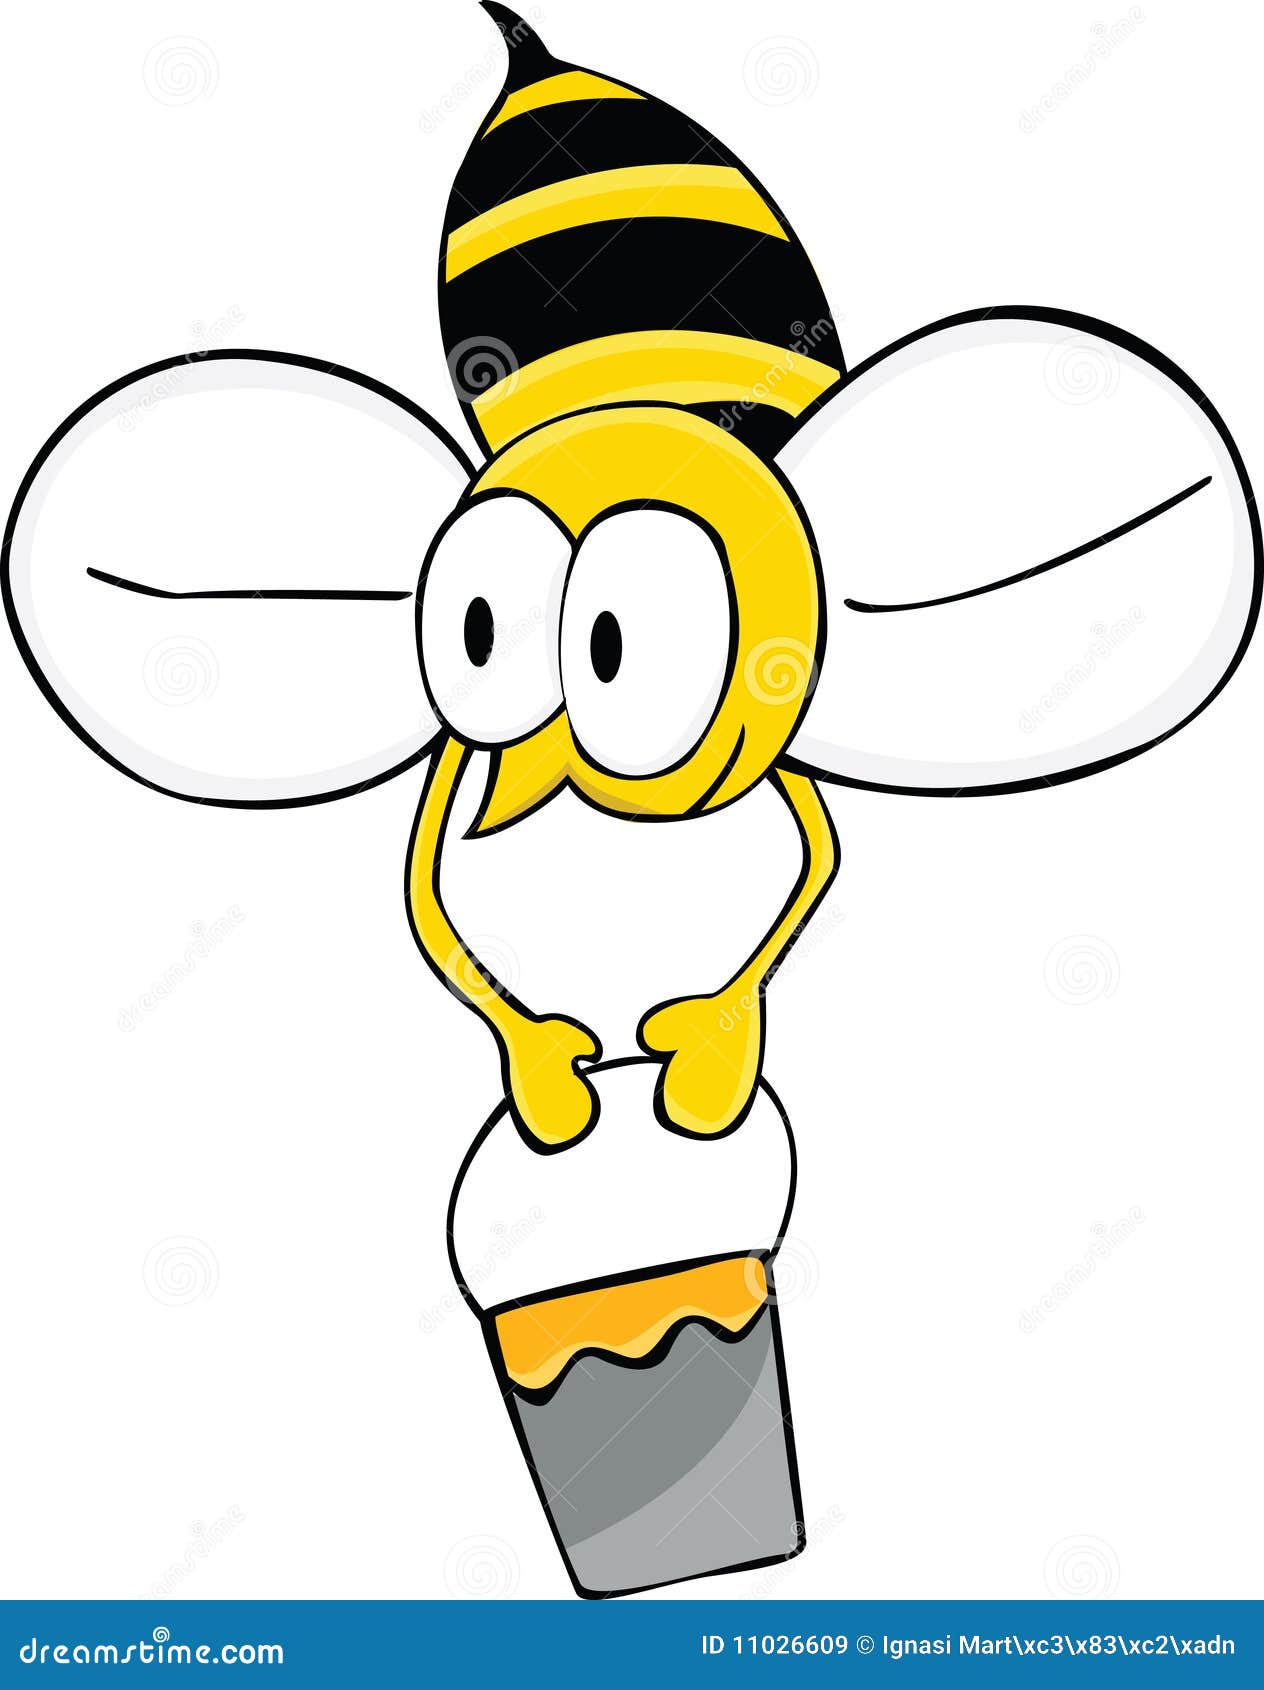 worker bee clipart - photo #10